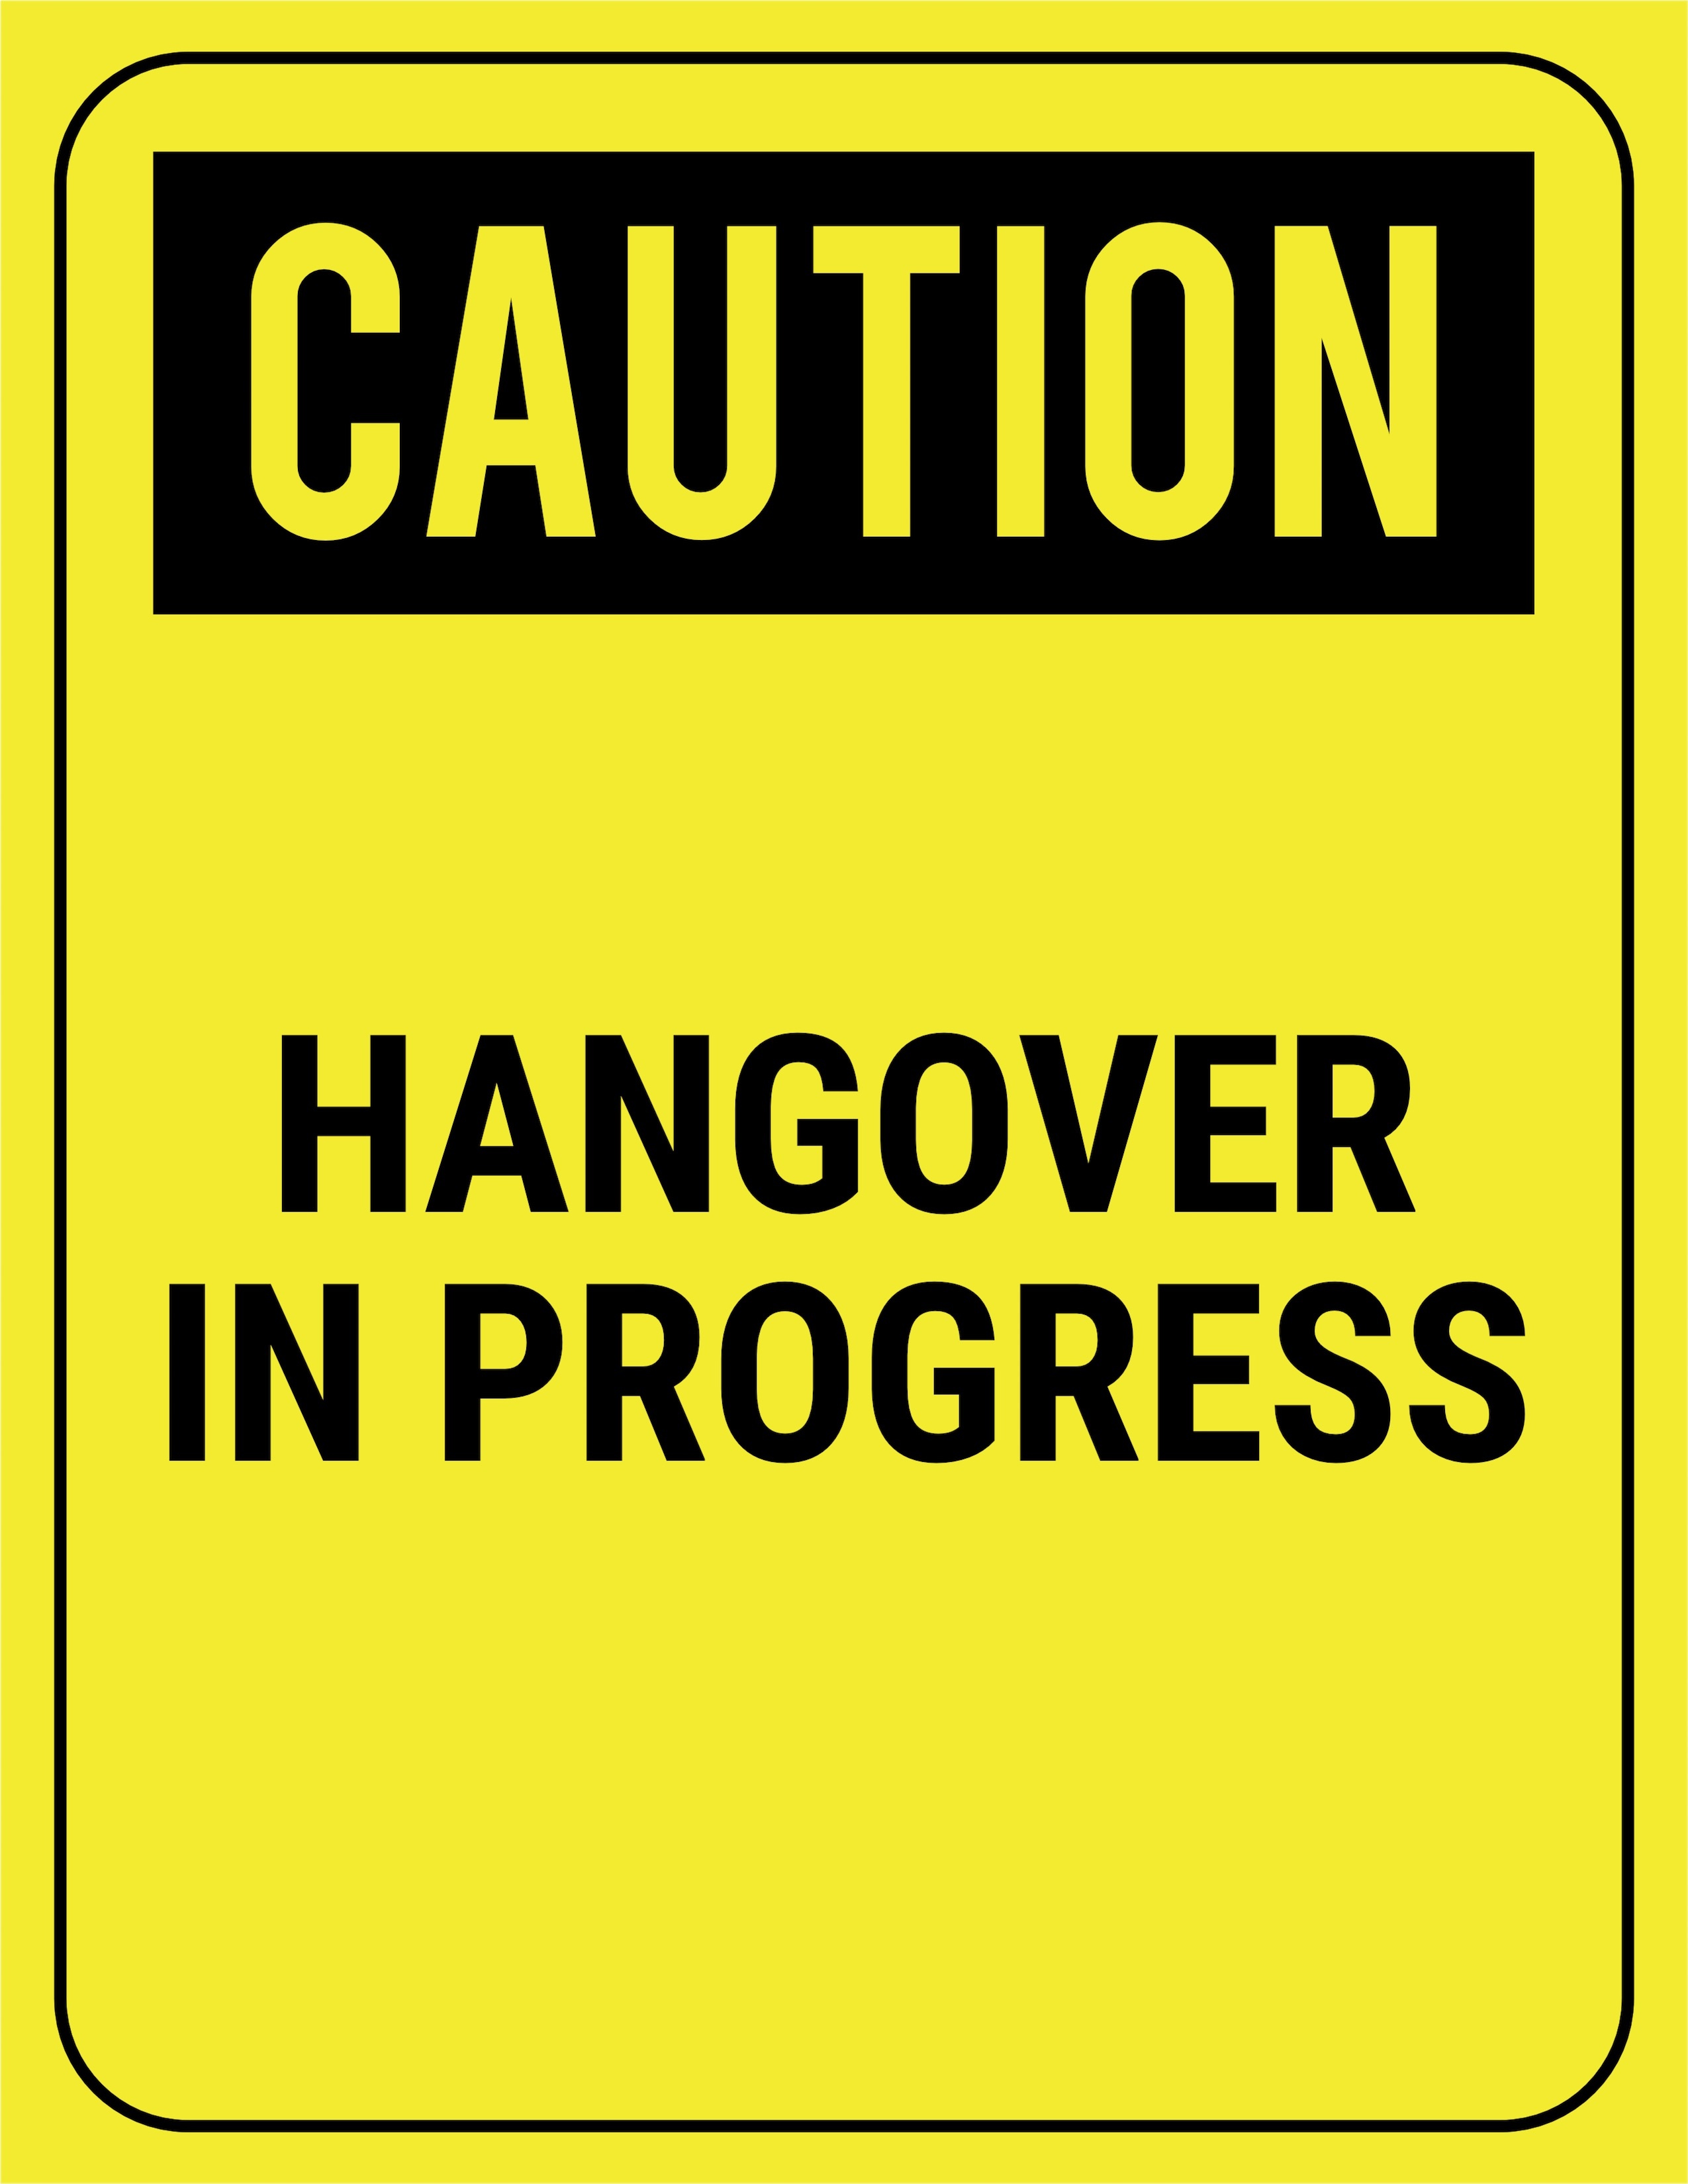 Funny Safety Signs To Download And Print - Free Printable Safety Signs